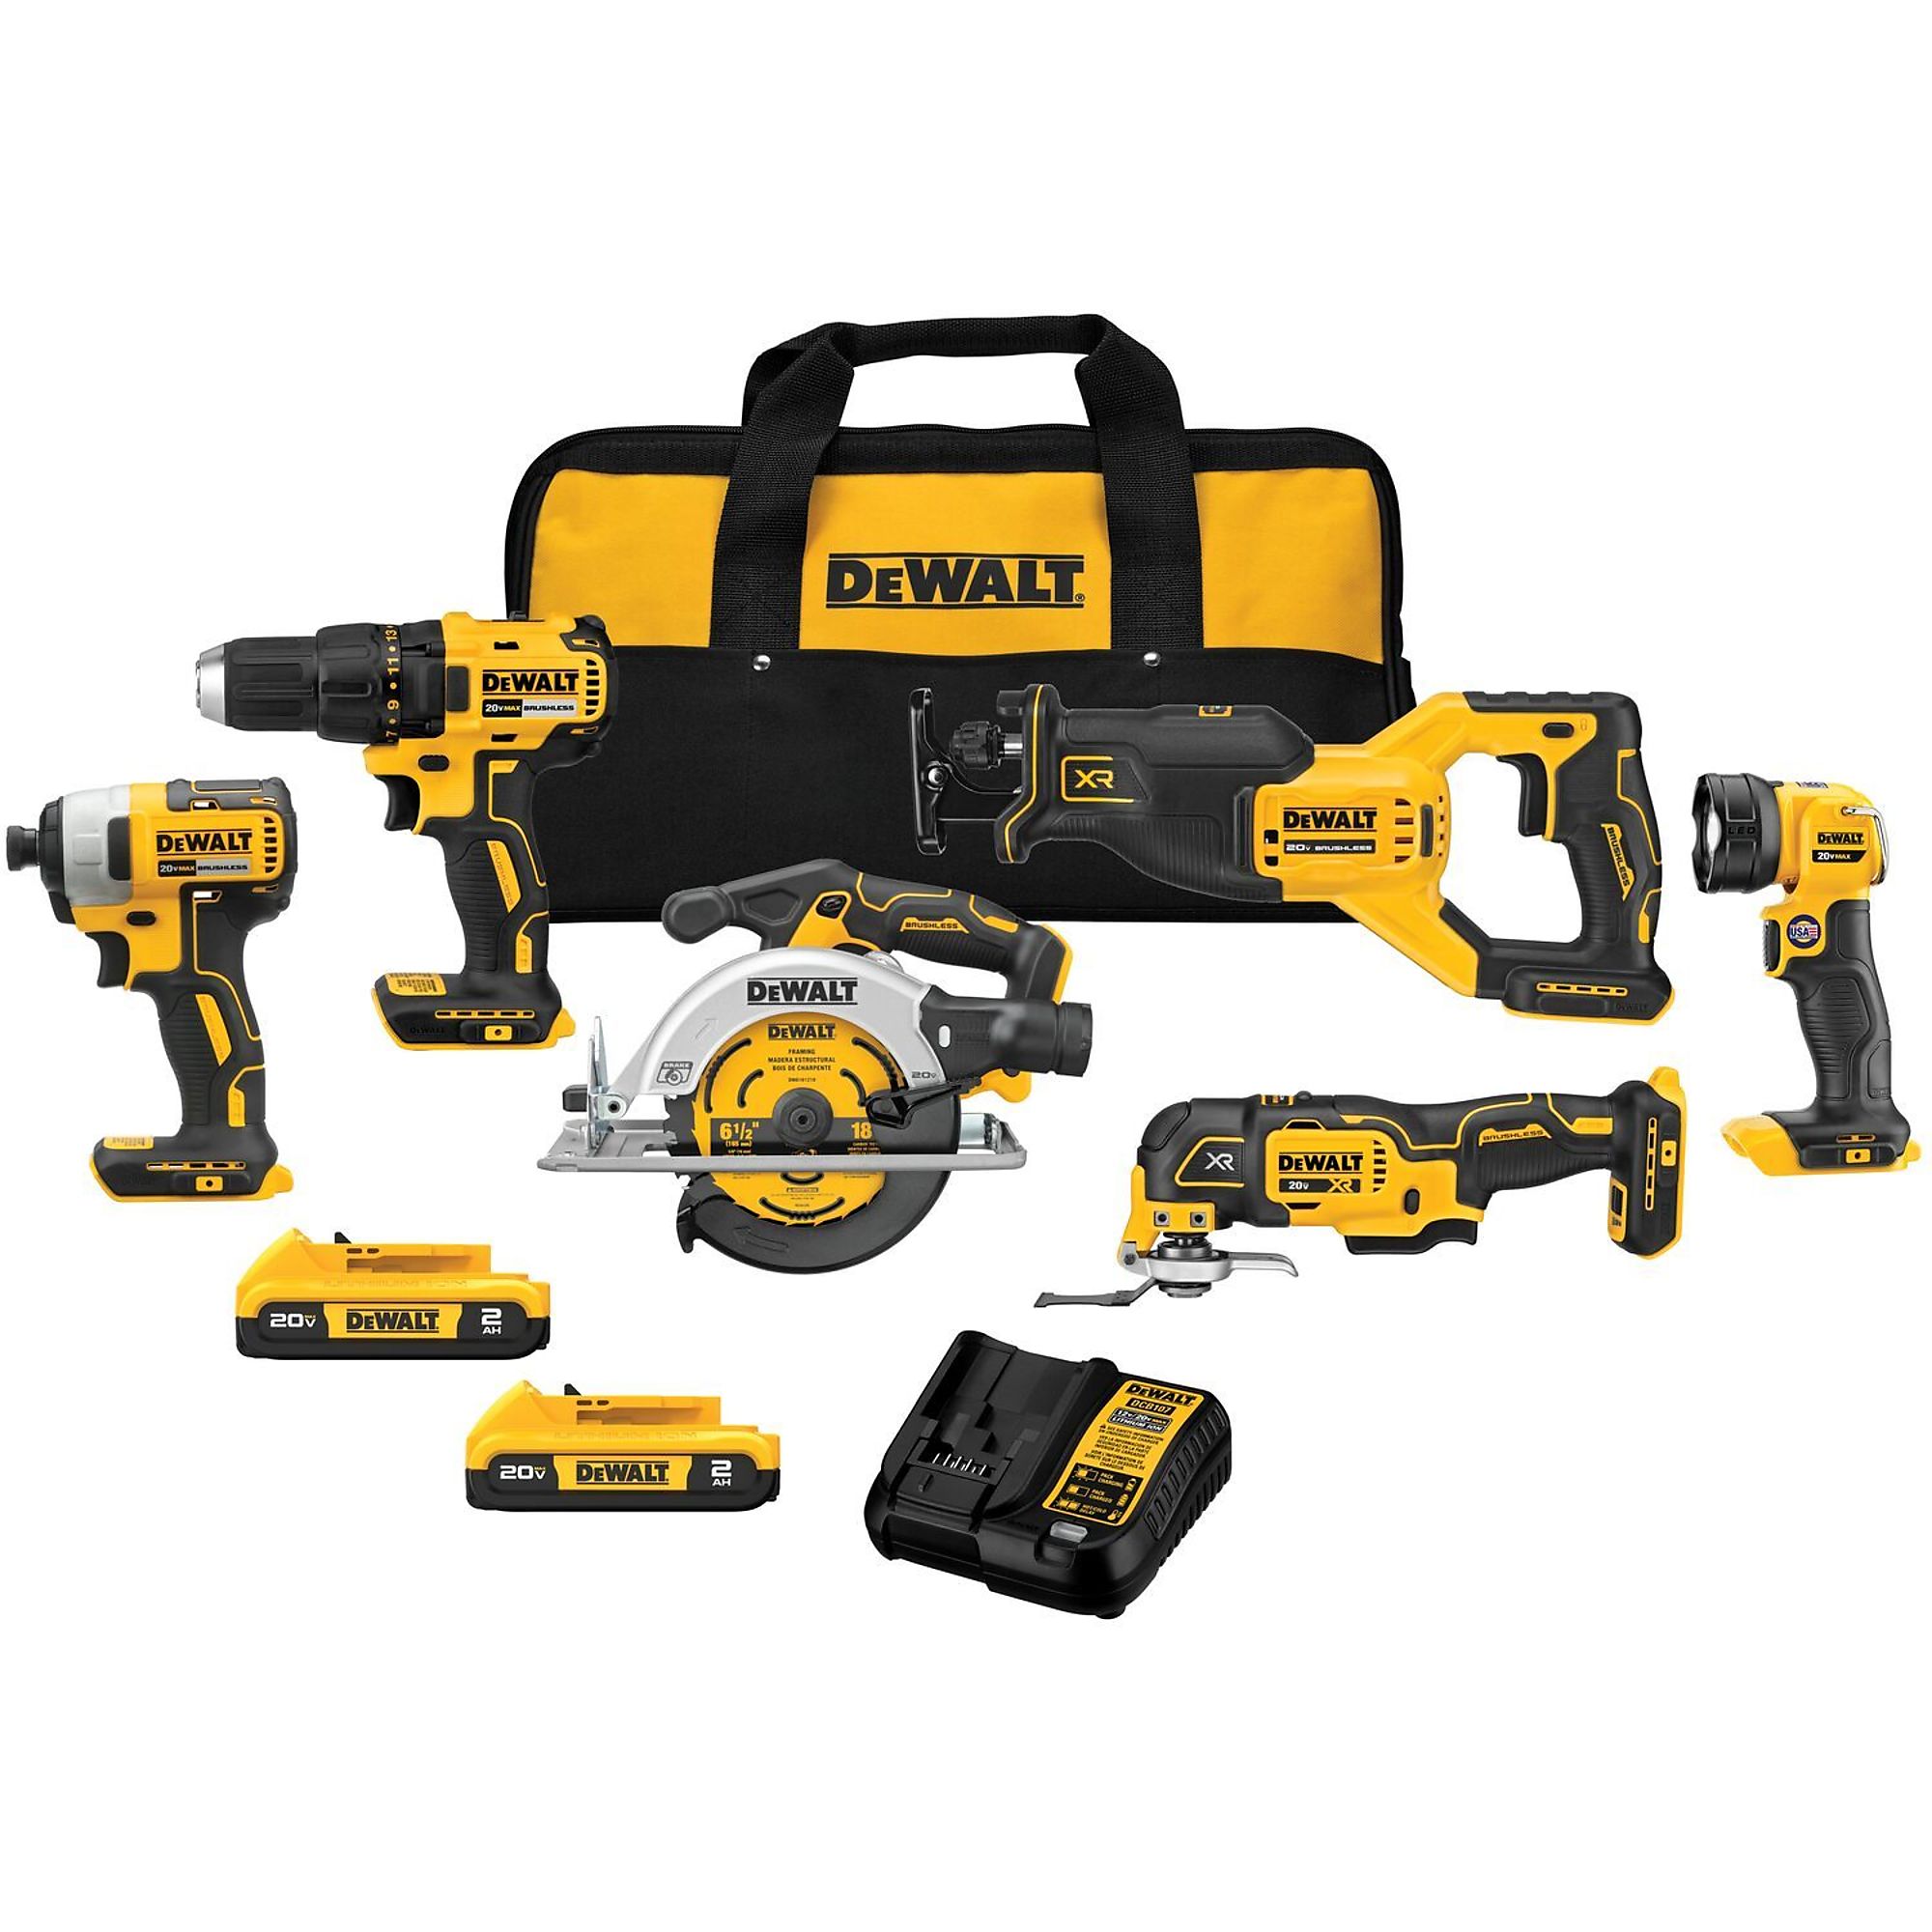 DEWALT, 20V MAX* Brushless Cordless 6-Tool Combo Kit, Chuck Size 1/2 in, Drive Size 1/4 in, Tools Included (qty.) 6 Model DCK675D2